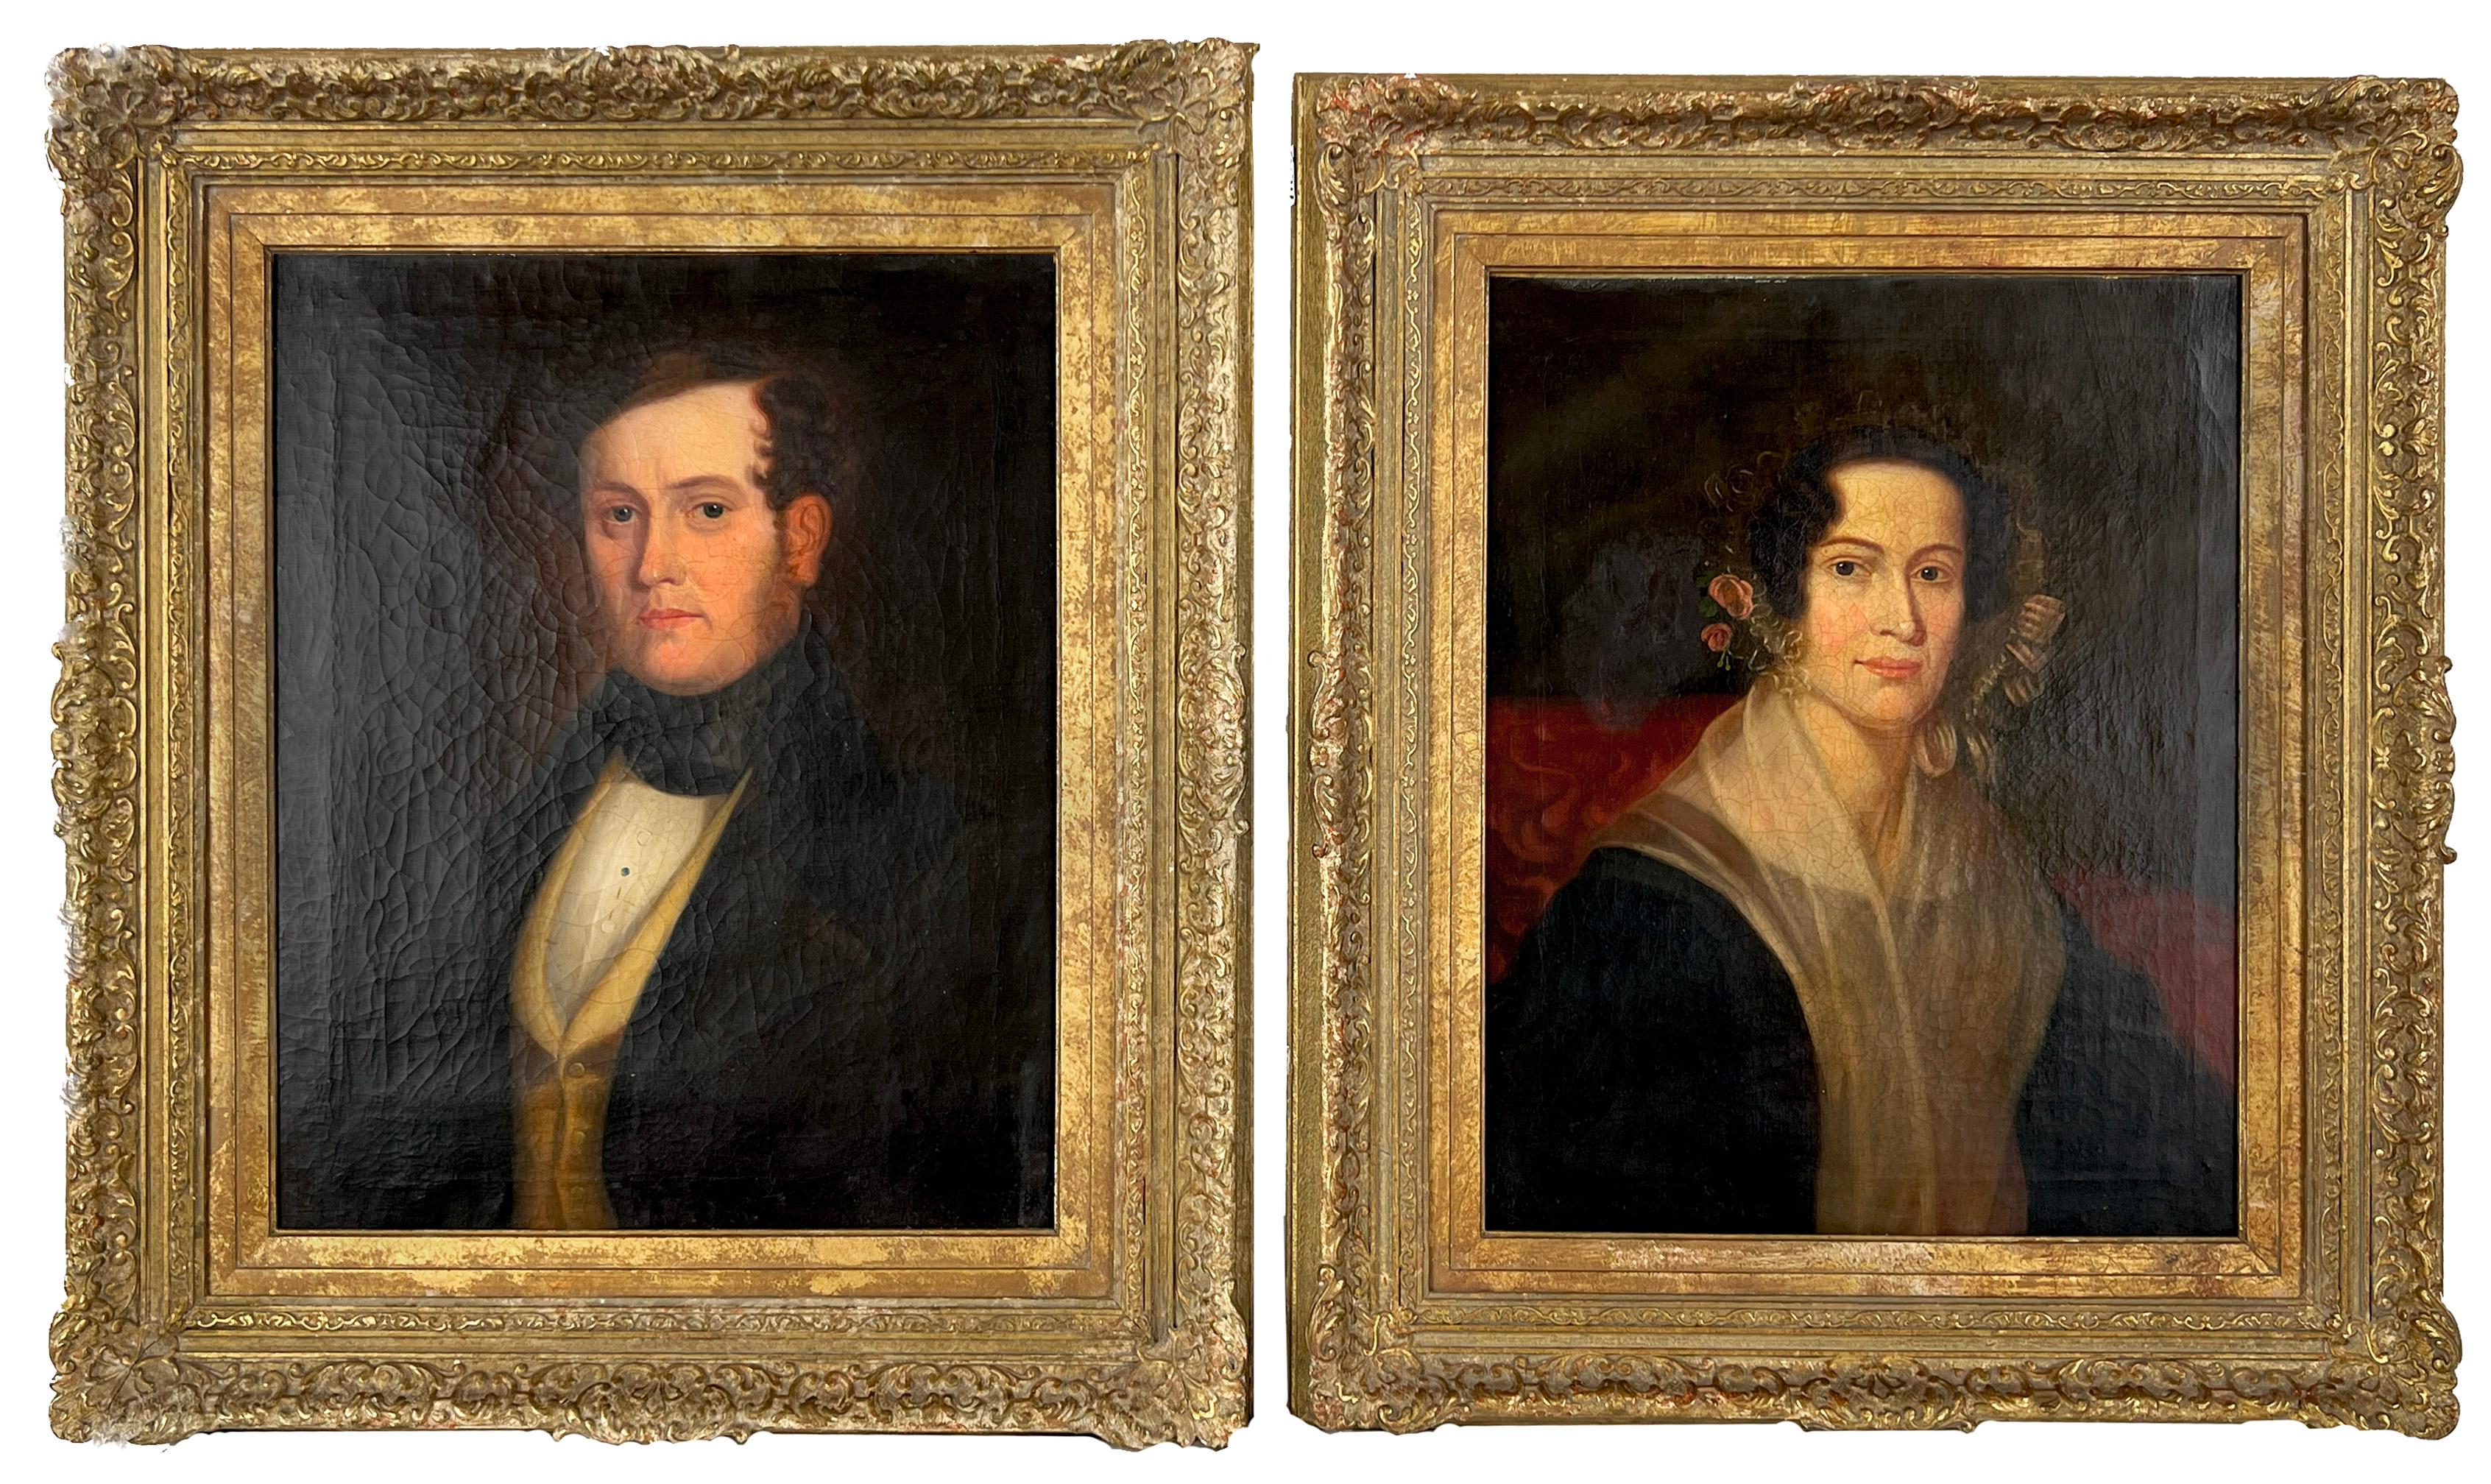 Early 19th Century Portrait of Dutch Man and Woman - Pair - Original Oil on Line